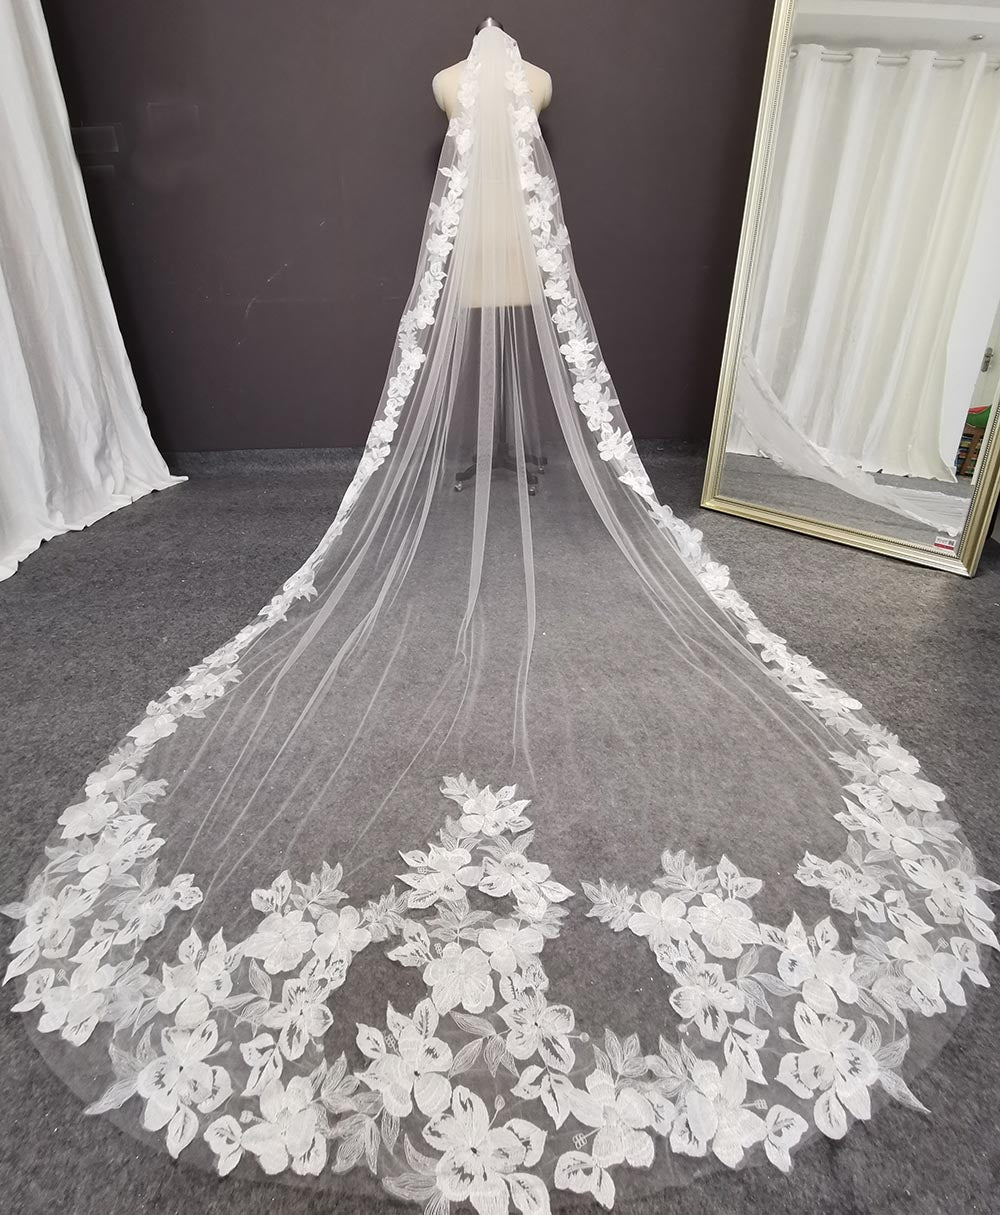 Ivory Cathedral Veil with Blusher Lace Applique Long Wedding Veil ACC1 –  SheerGirl